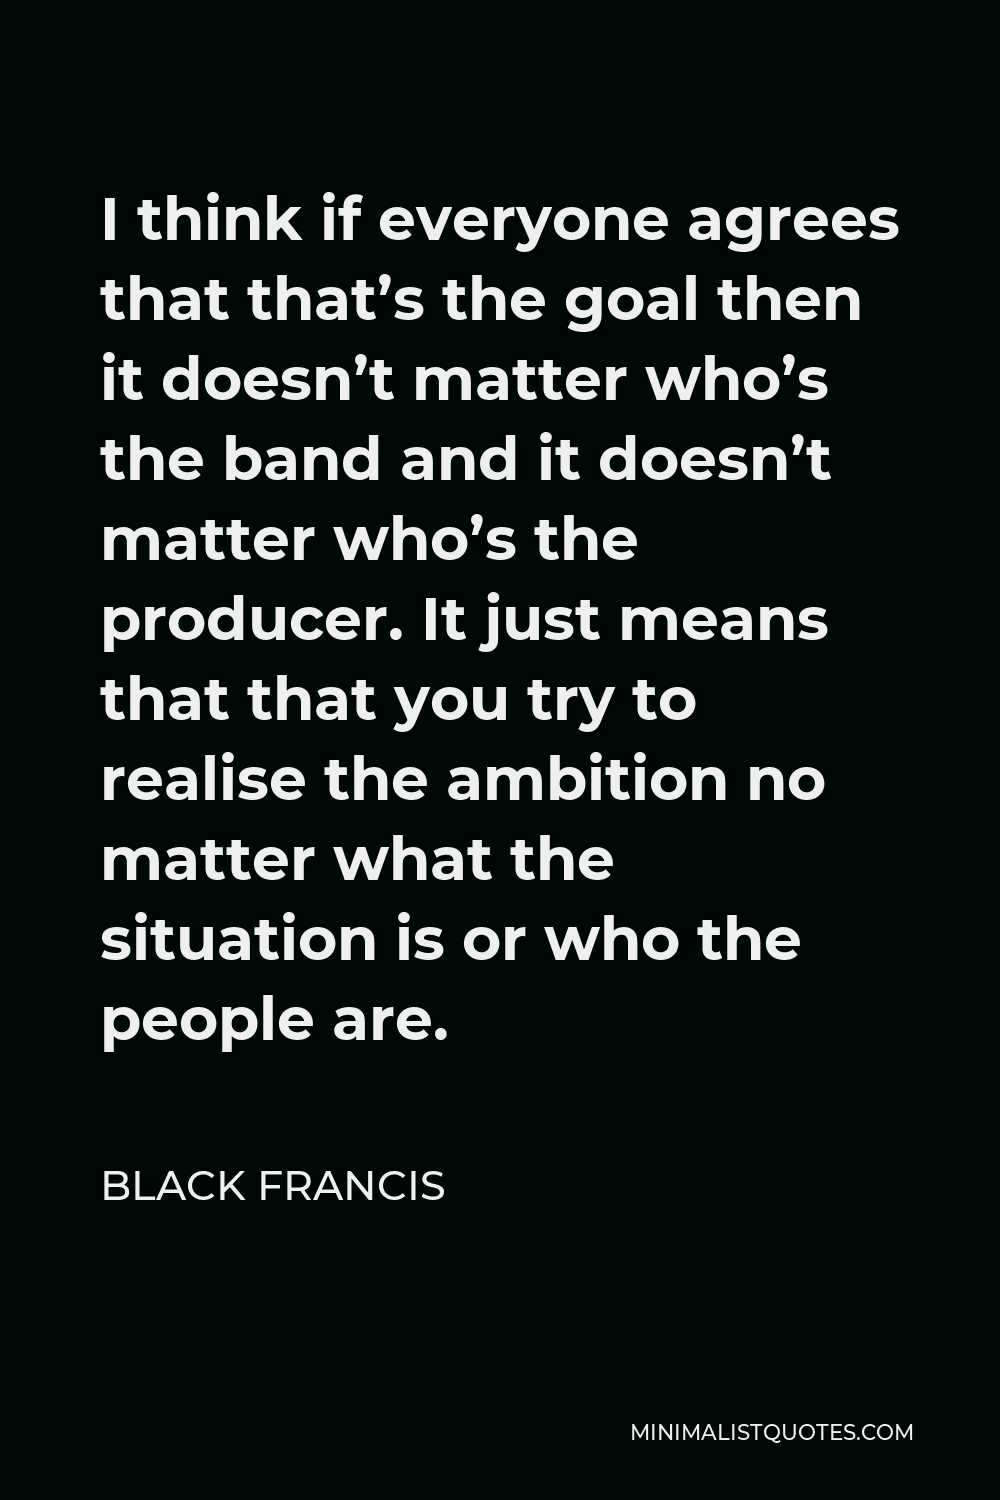 Black Francis Quote - I think if everyone agrees that that’s the goal then it doesn’t matter who’s the band and it doesn’t matter who’s the producer. It just means that that you try to realise the ambition no matter what the situation is or who the people are.